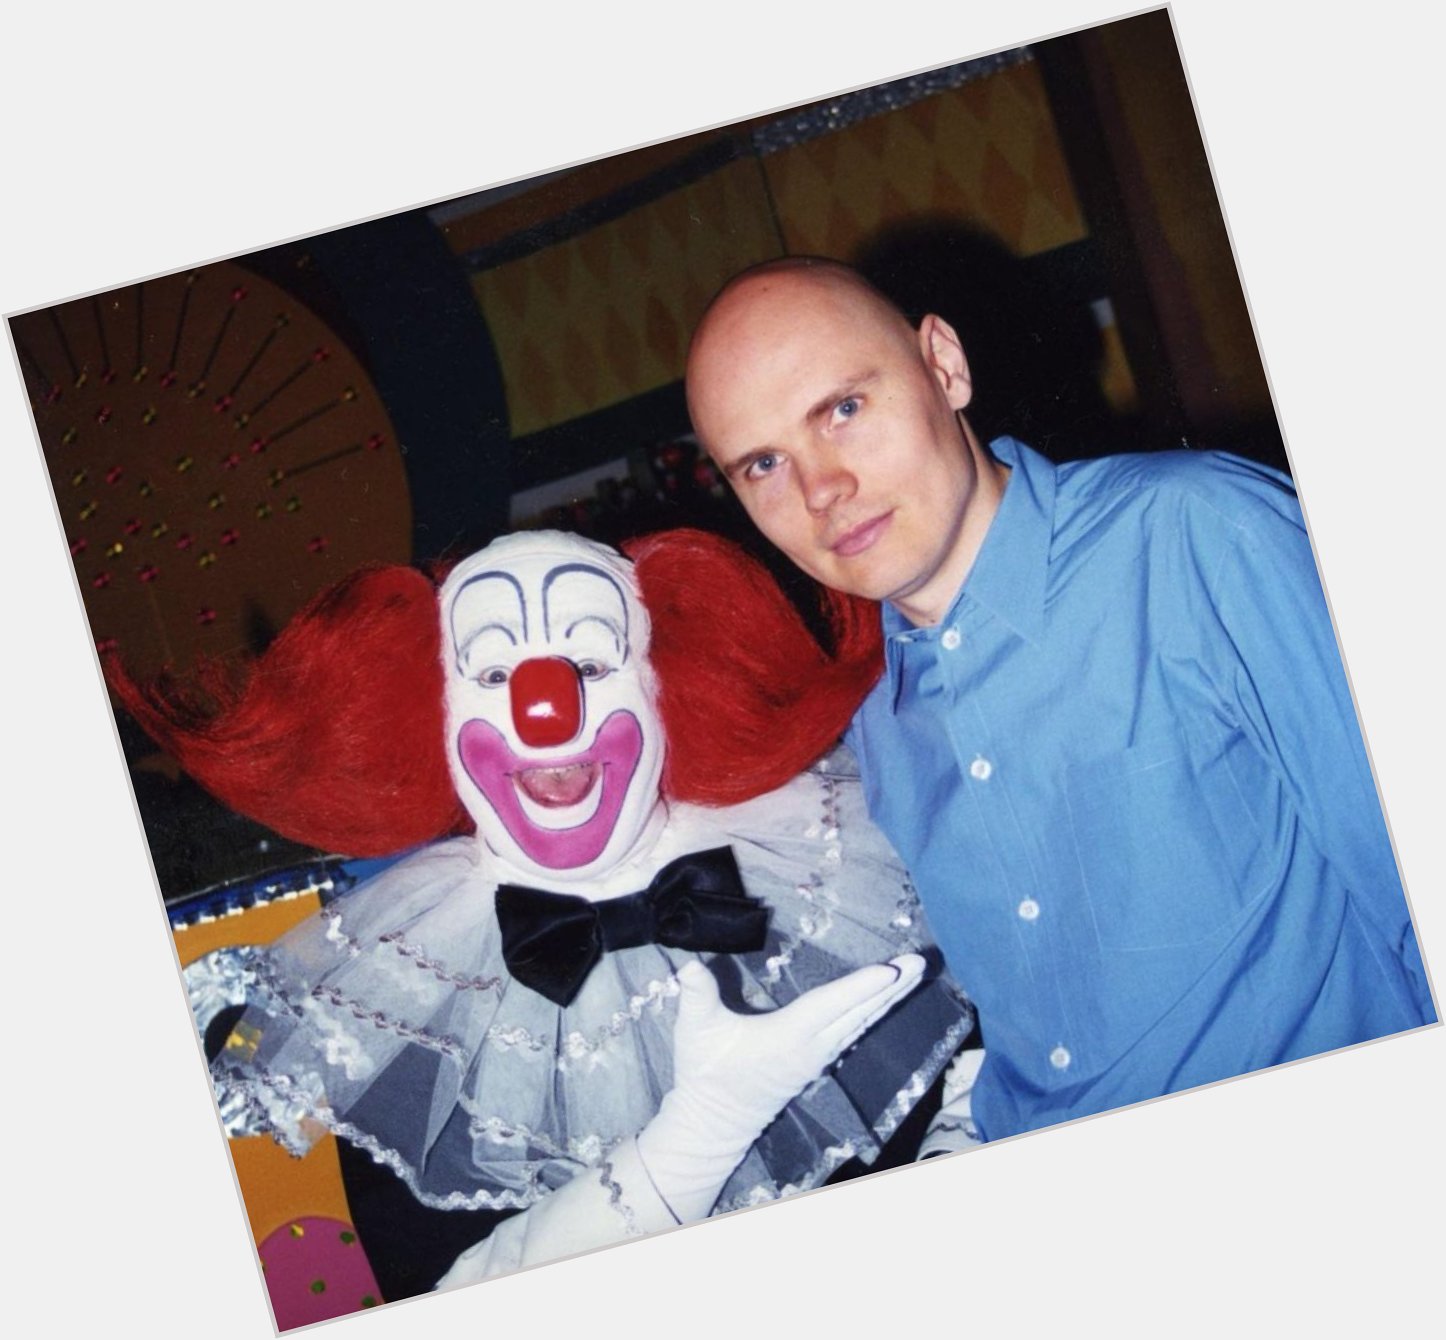 Happy birthday to Billy Corgan, the pale, bald, middle-aged man who feels like a rat in a cage on the RIGHT. 